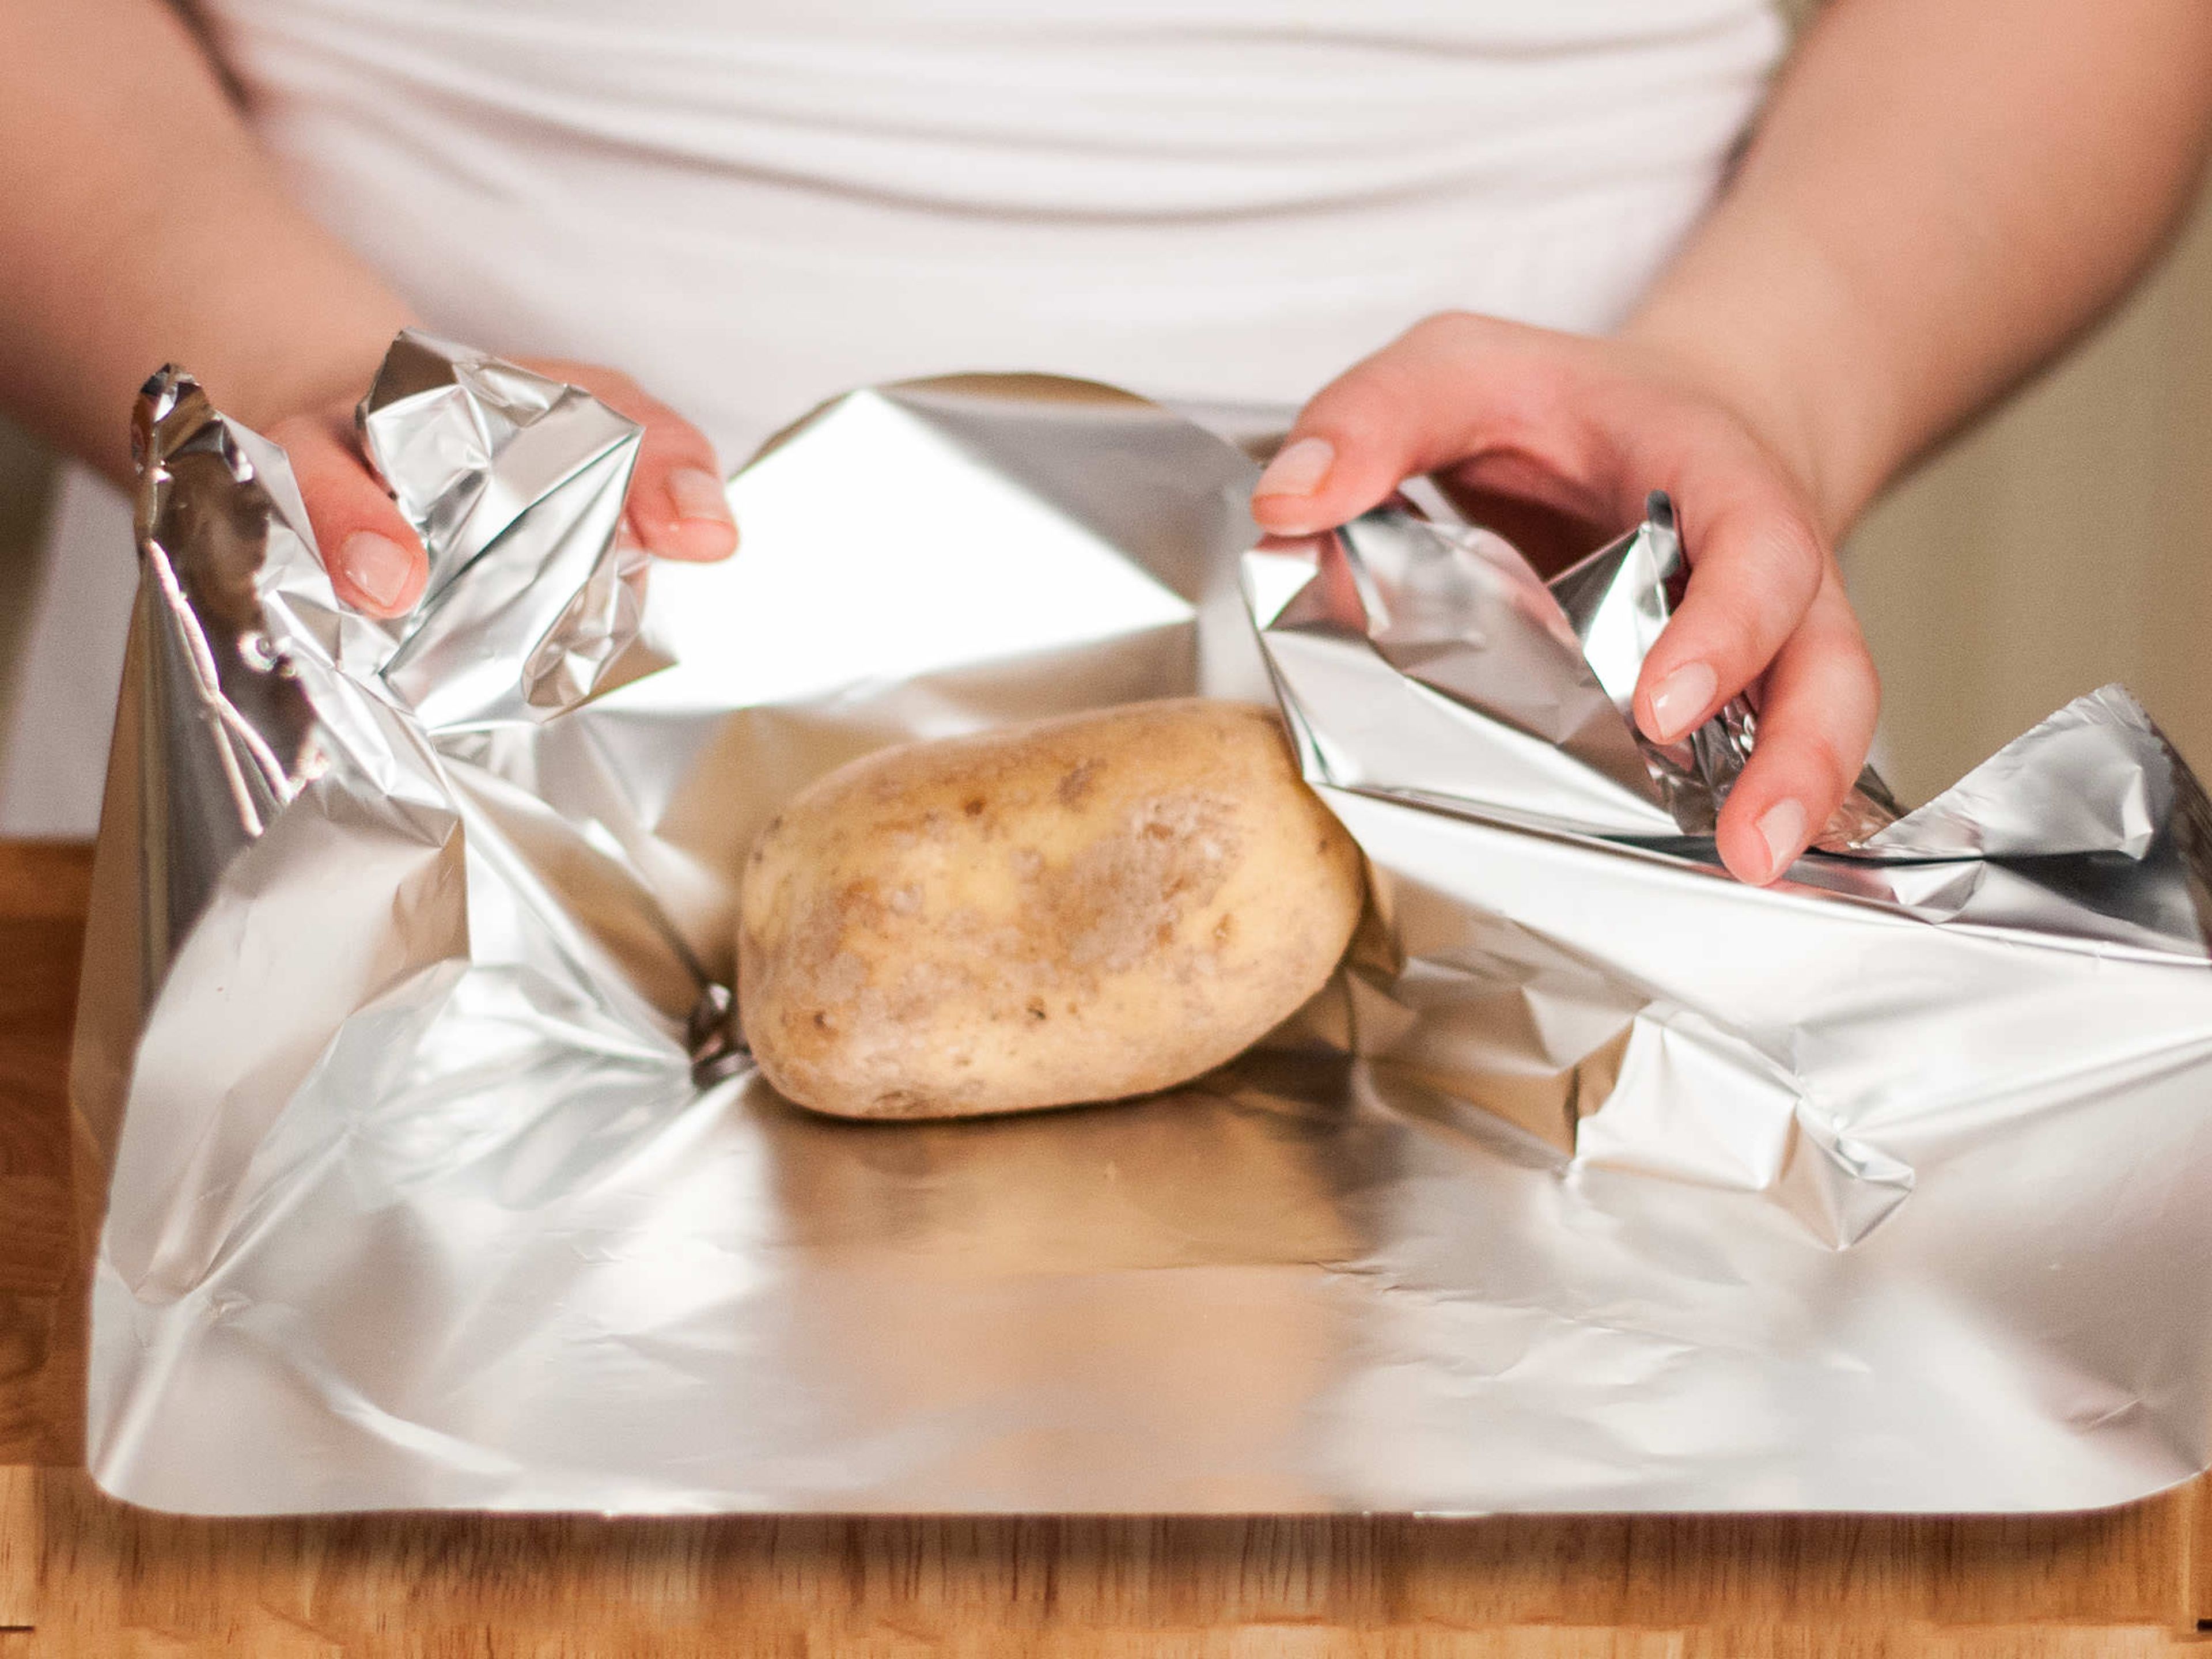 Preheat the oven to 60°C (140°F). Preheat the grill. Wrap each potato in some aluminum foil and place on grill for approx. 1 hour. Turn every 20 min. to ensure even cooking.